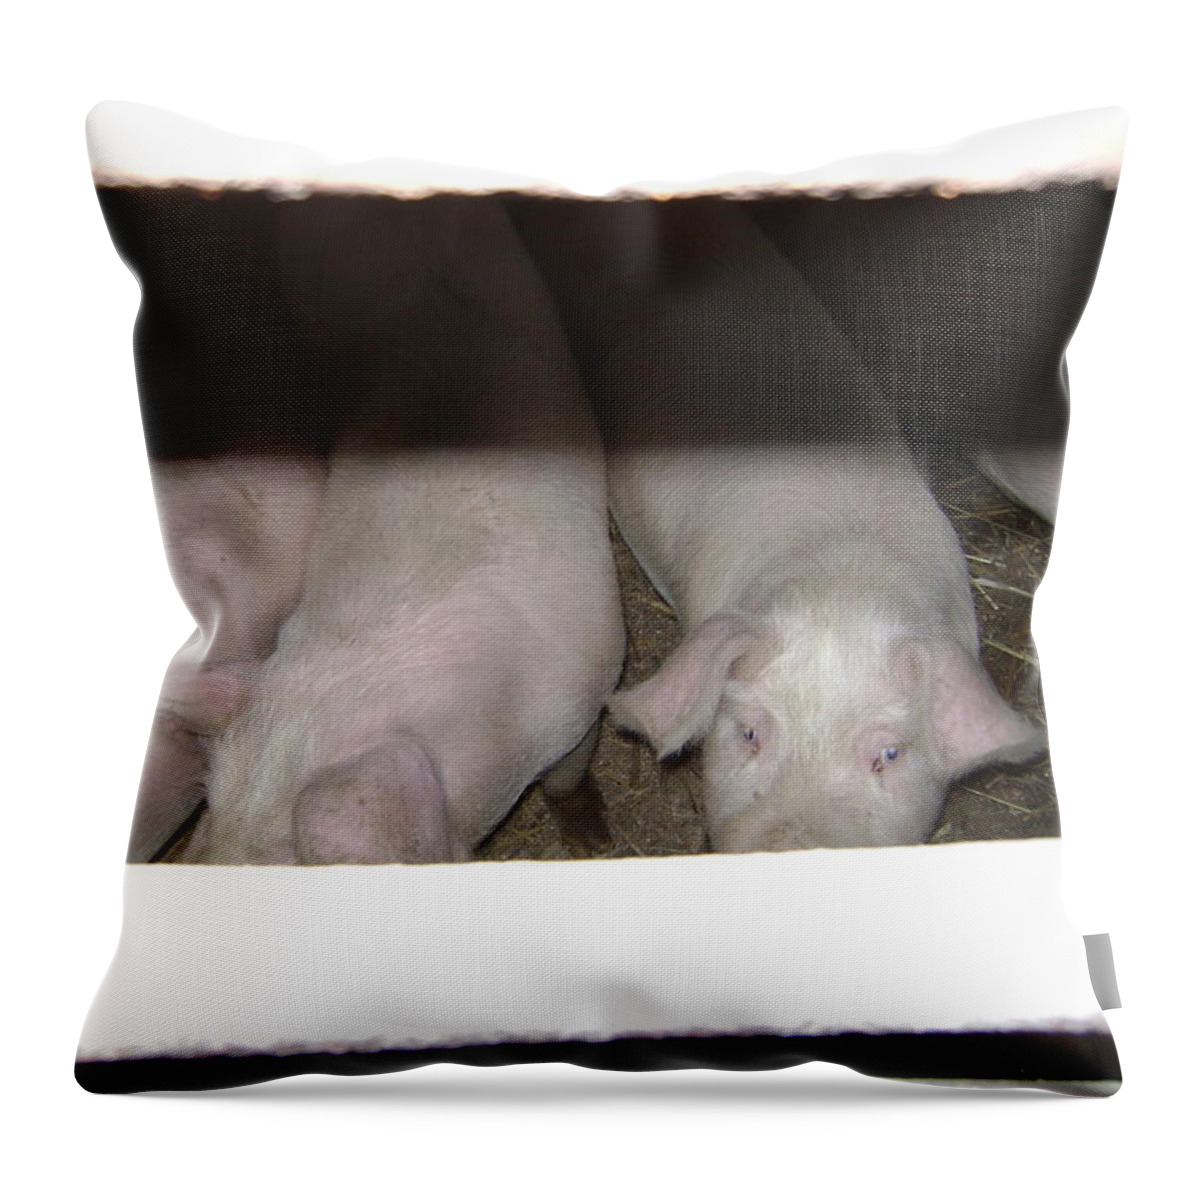 Pigs Throw Pillow featuring the photograph These Eyes by Moshe Harboun